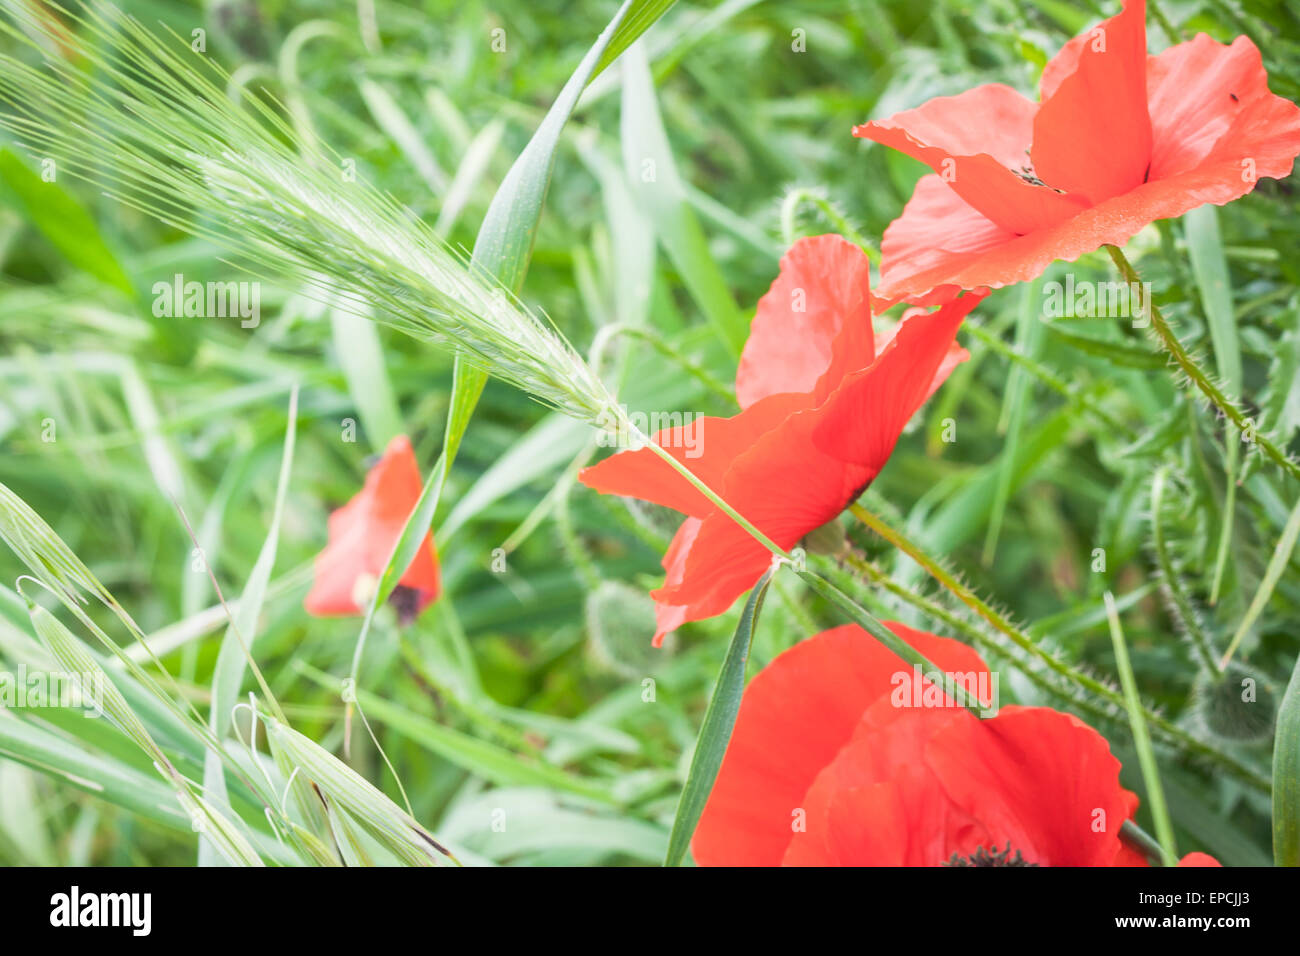 Spike green poppy. Spike grow up over a poppies Stock Photo